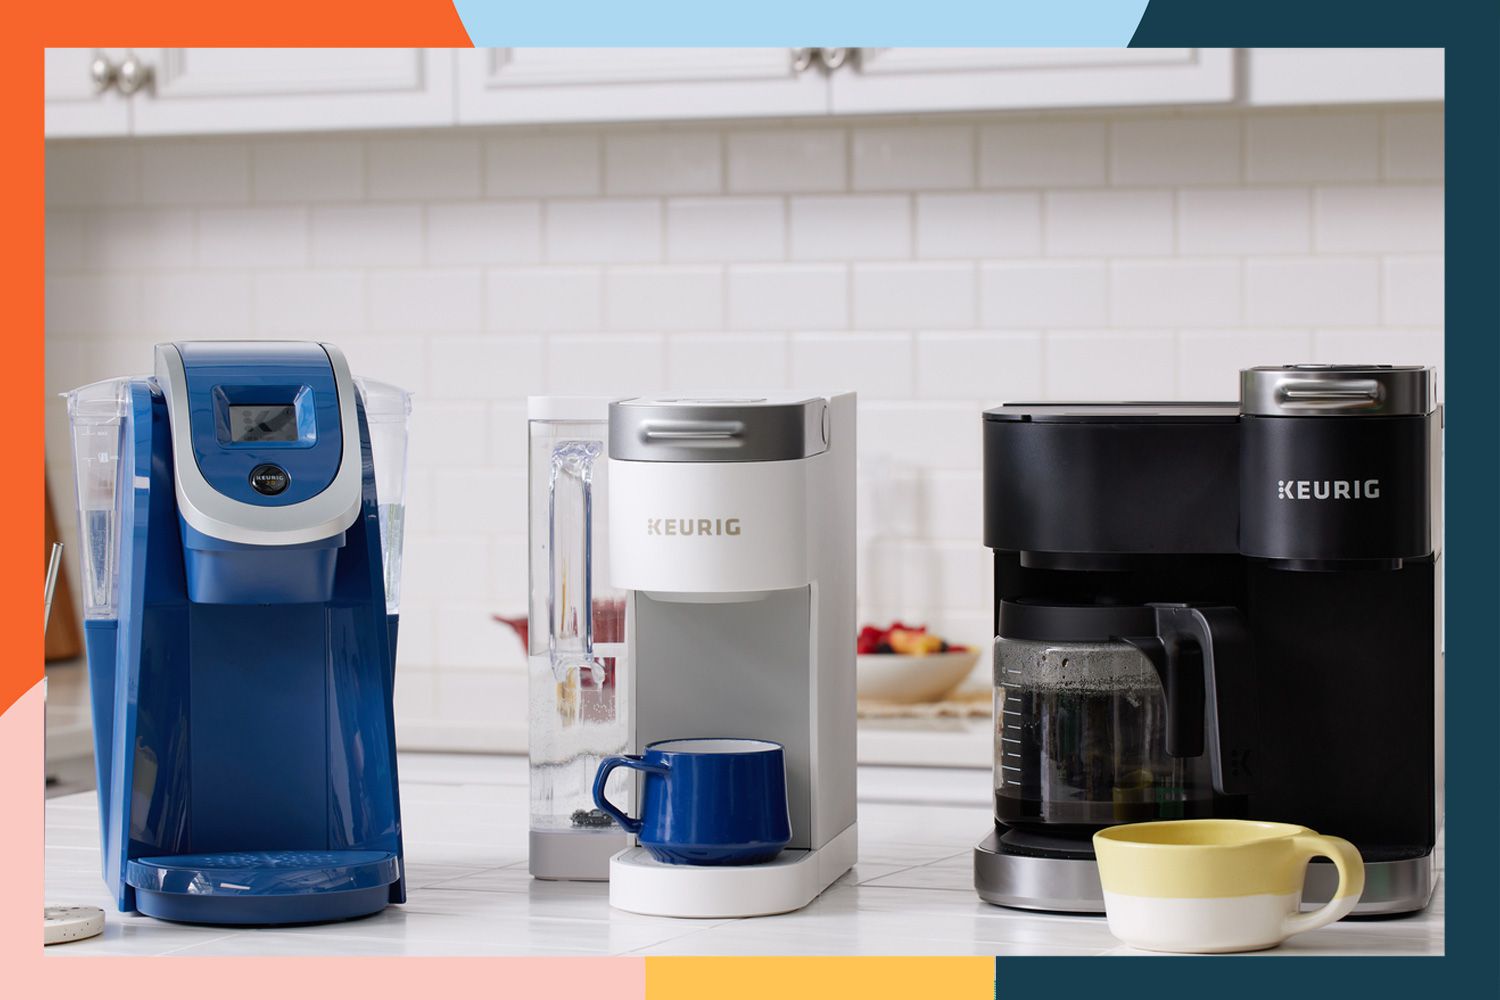 Three Keurig coffee makers on a counter with a colorful border.